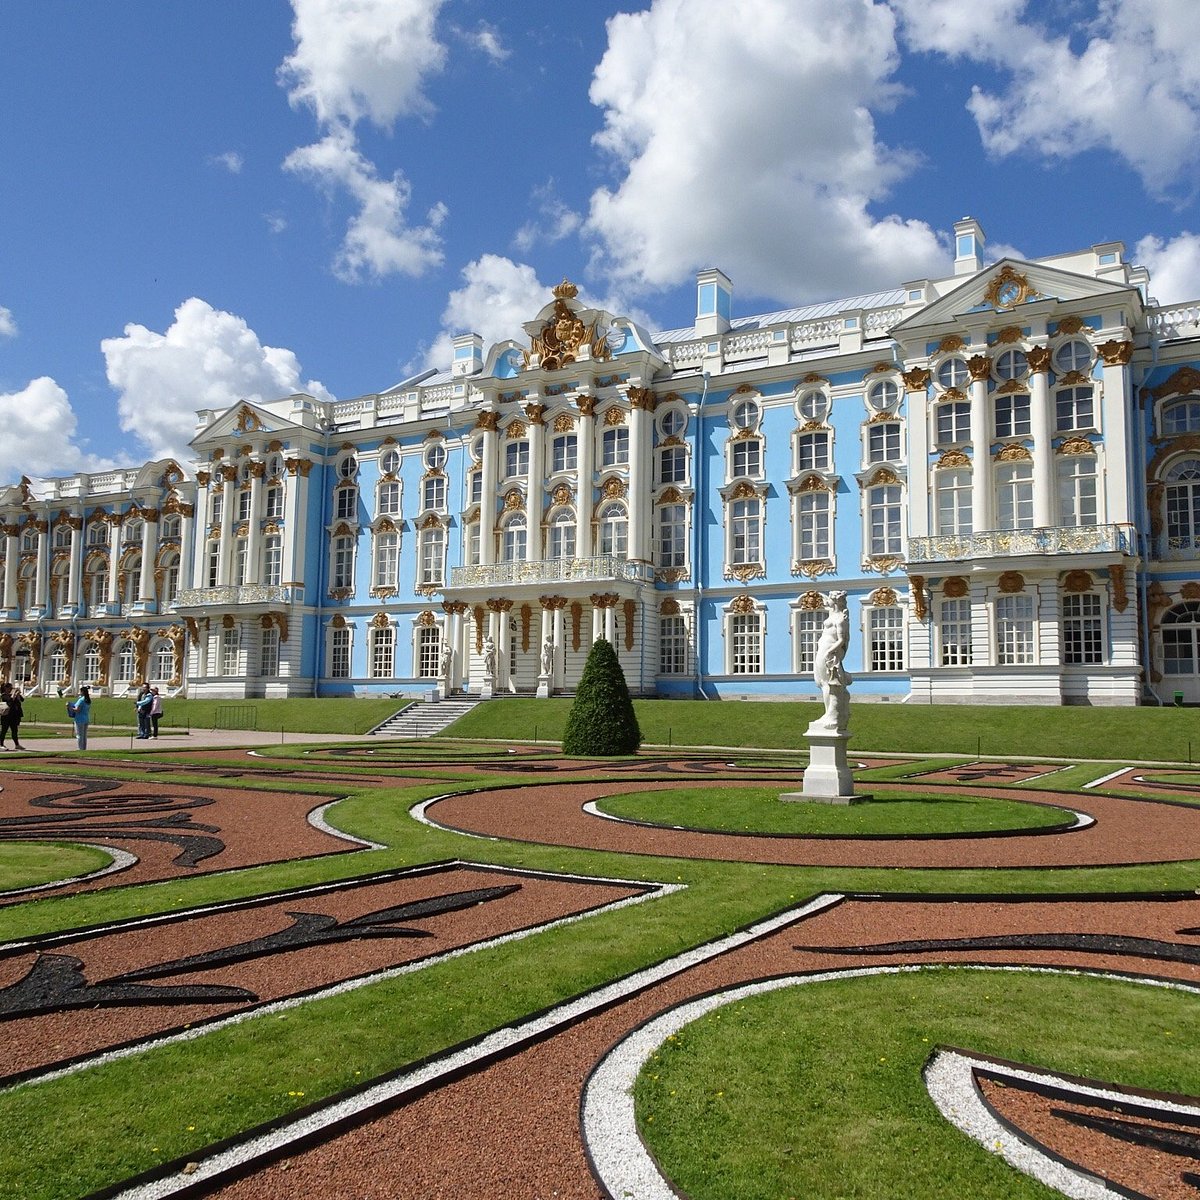 The Catherine Palace in St. Petersburg, Pushkin